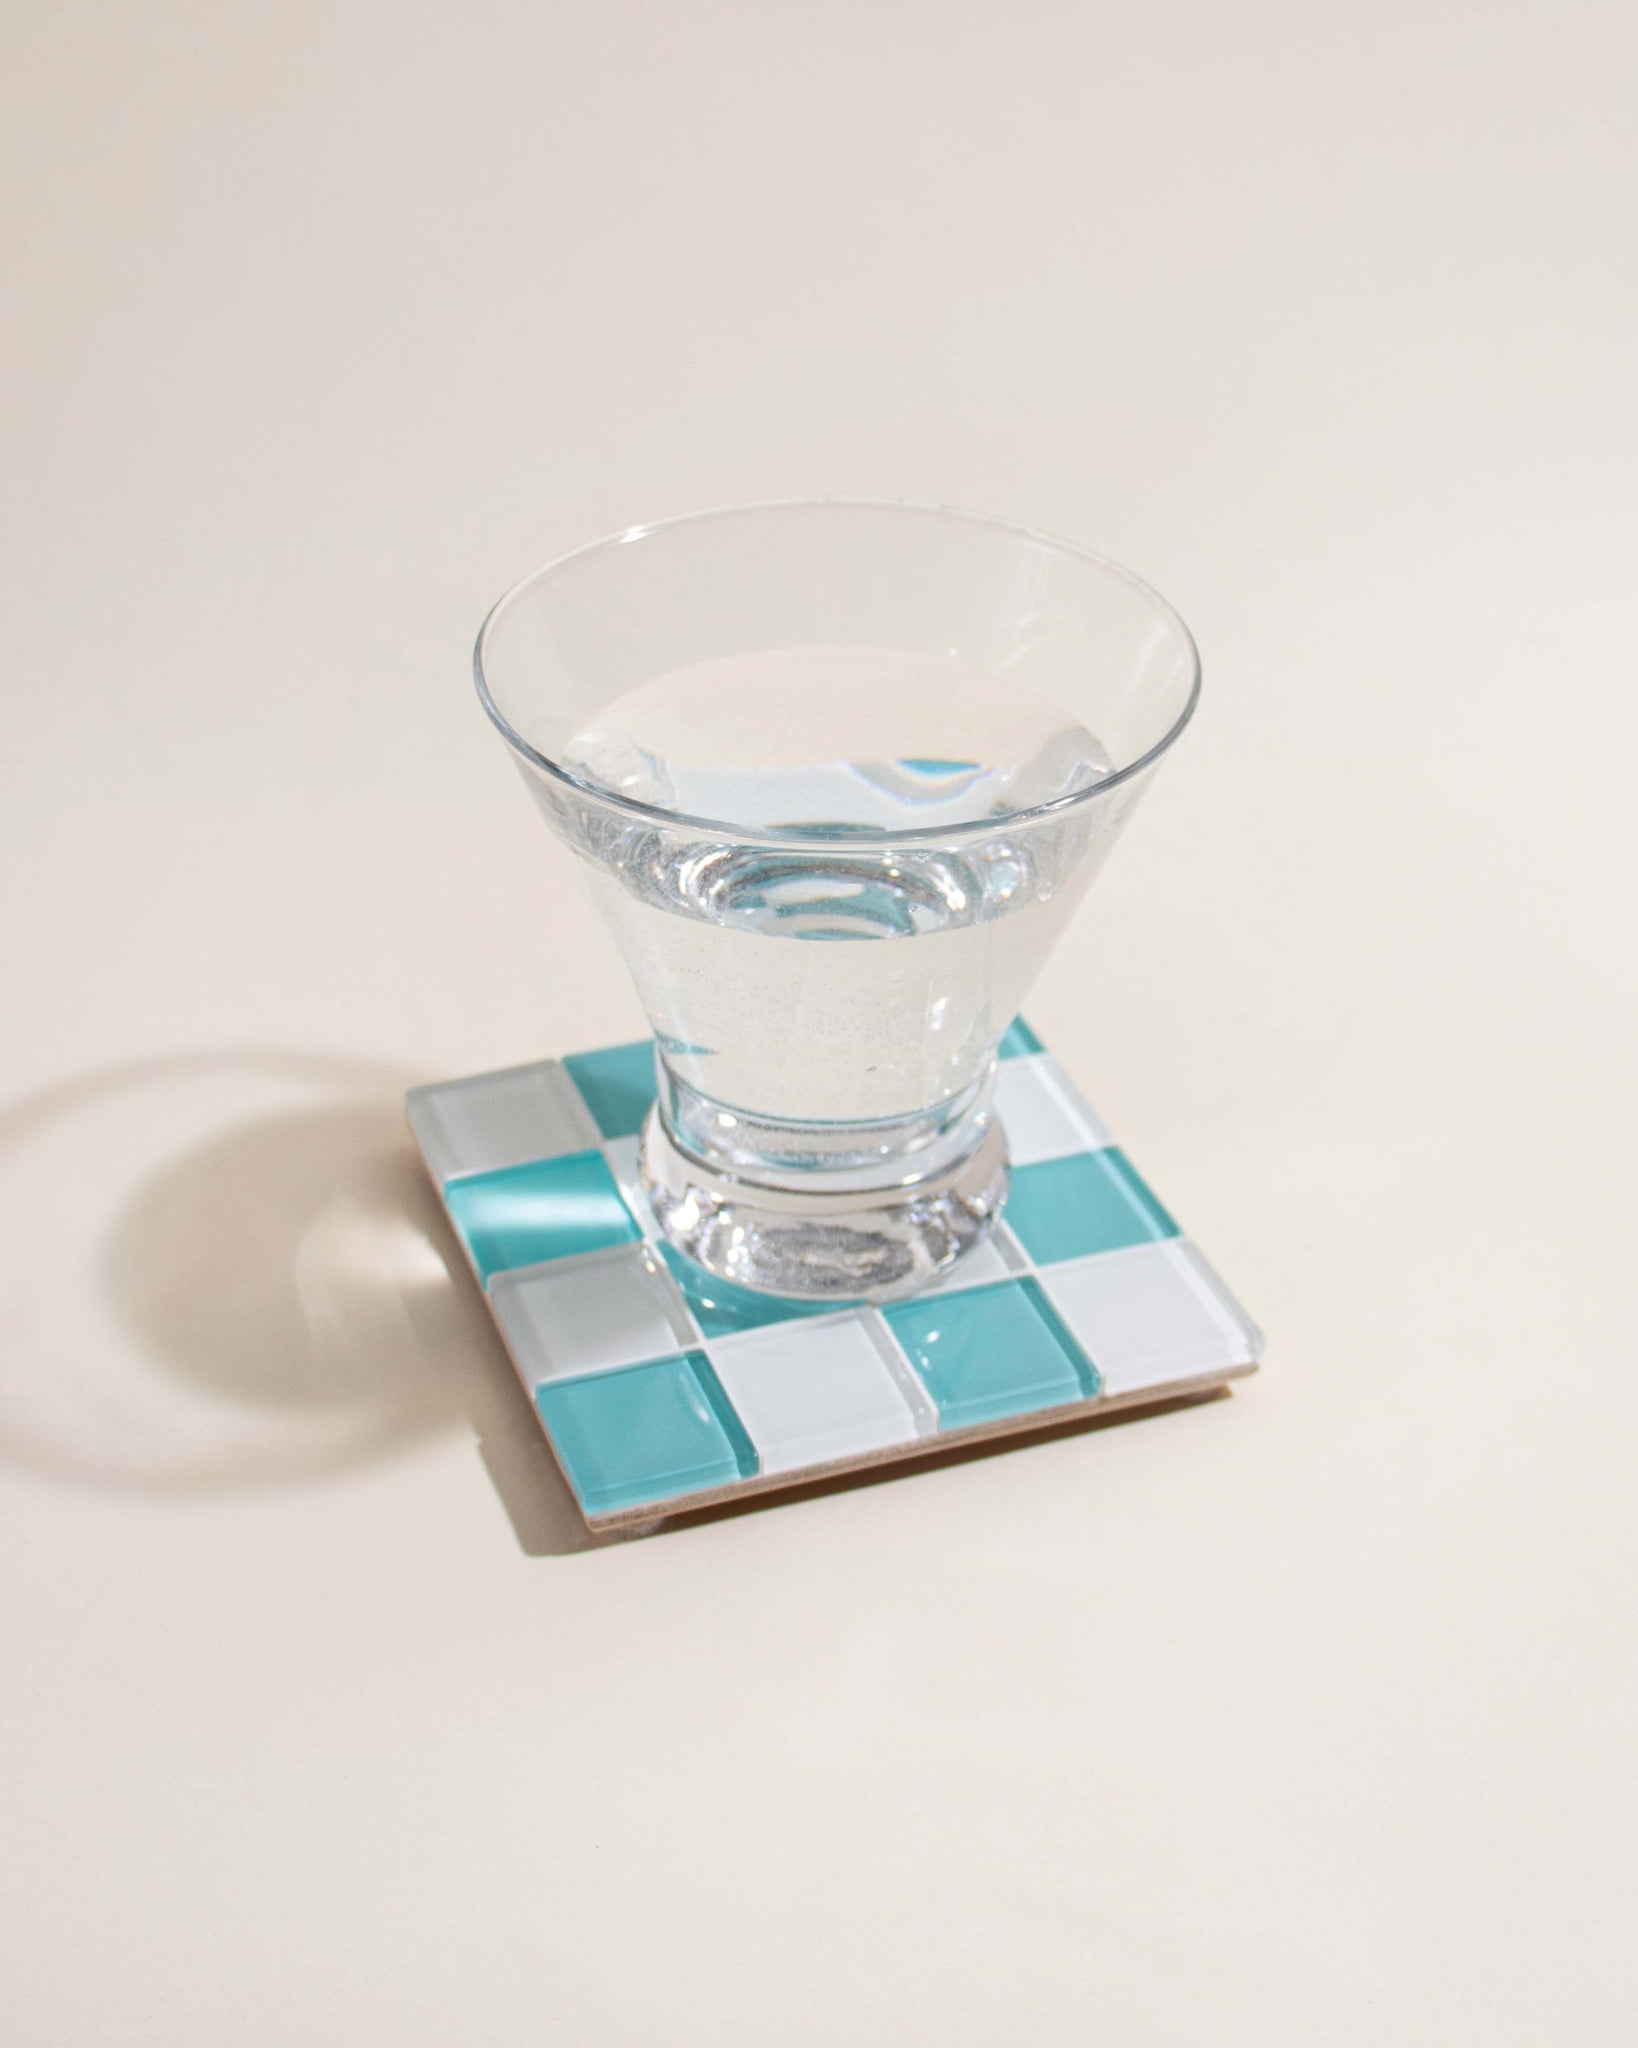 GLASS TILE COASTER - Lullaby